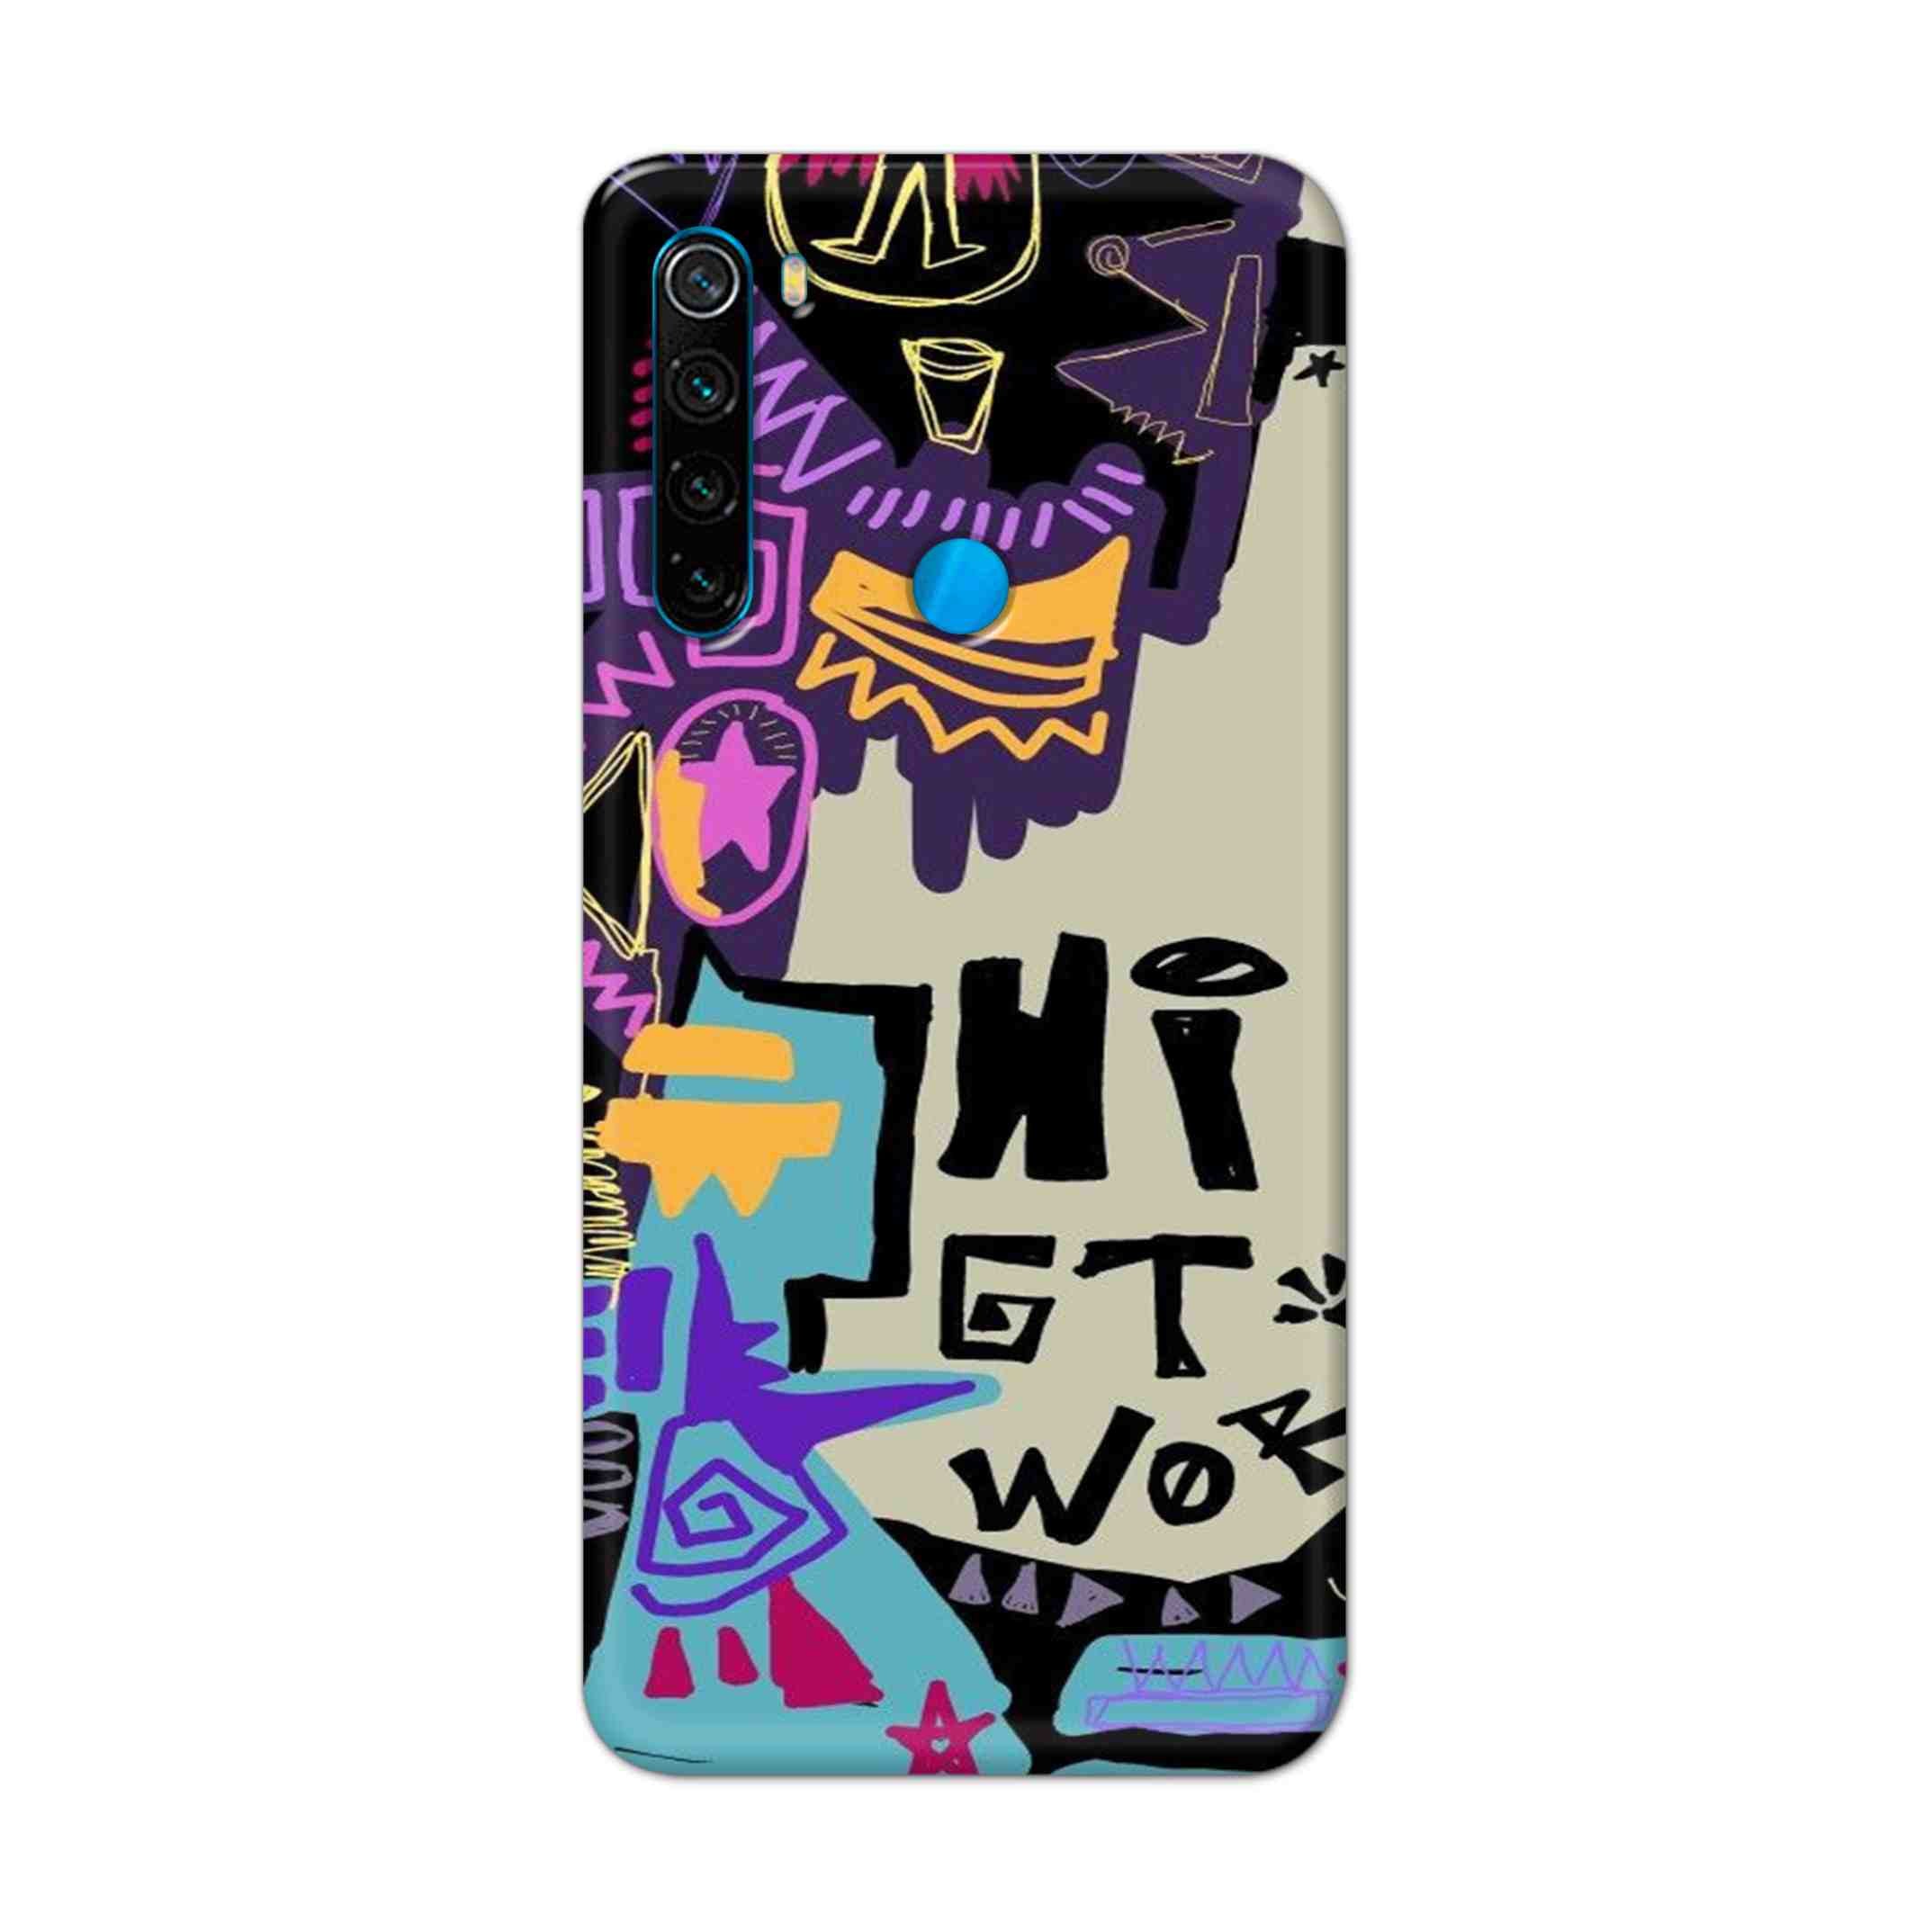 Buy Hi Gt World Hard Back Mobile Phone Case Cover For Xiaomi Redmi Note 8 Online